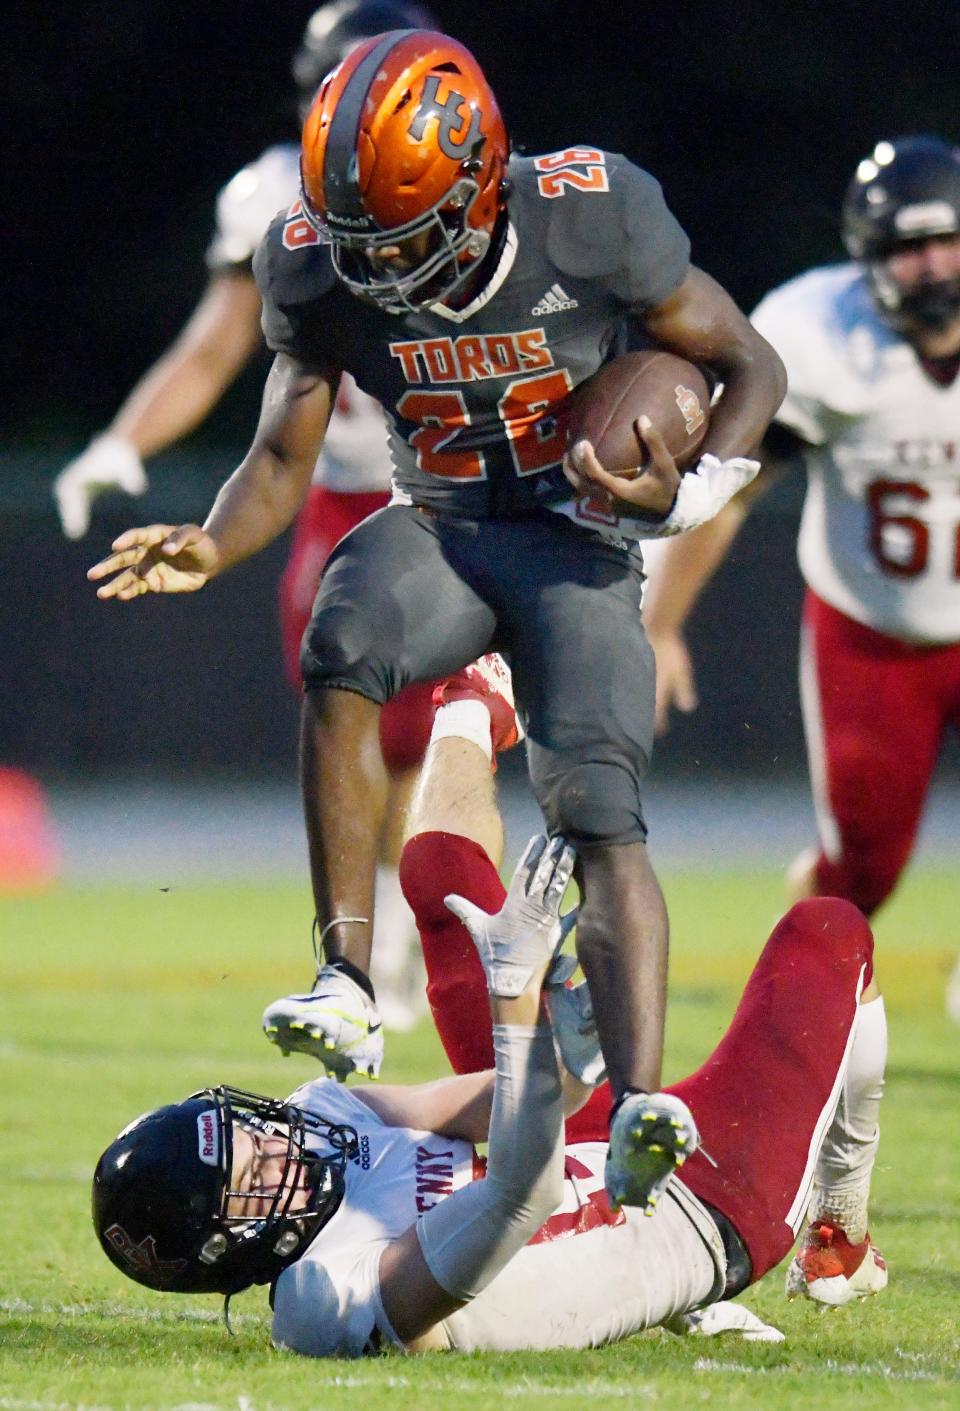 Tocoi's running back Wendell Dean (26) jumps over Bishop Kenny's Nash Beenen (17) on a late second quarter run for a first down. The Tocoi Creek Toros hosted the Bishop Kenny Crusaders at the school's Saint Johns County campus Friday, September 9, 2022.